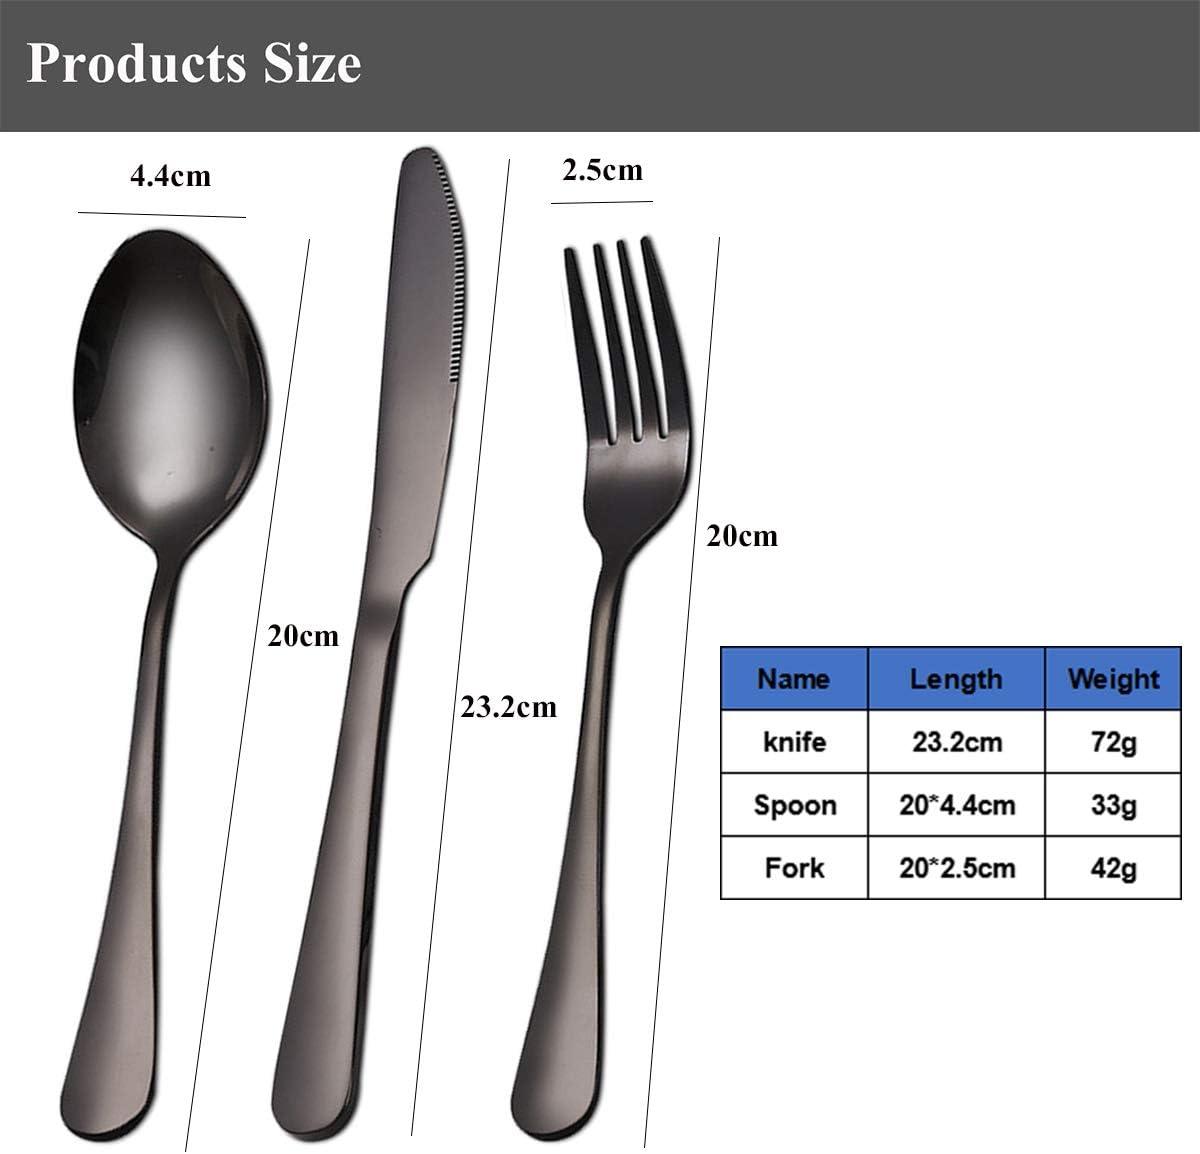  PREMIUM QUALITY Stainless Steel travel utensils Set with case,  Healthy & Eco-Friendly 3pc Full Size Fork, Spoon, Portable, reusable  utensils with case : Health & Household